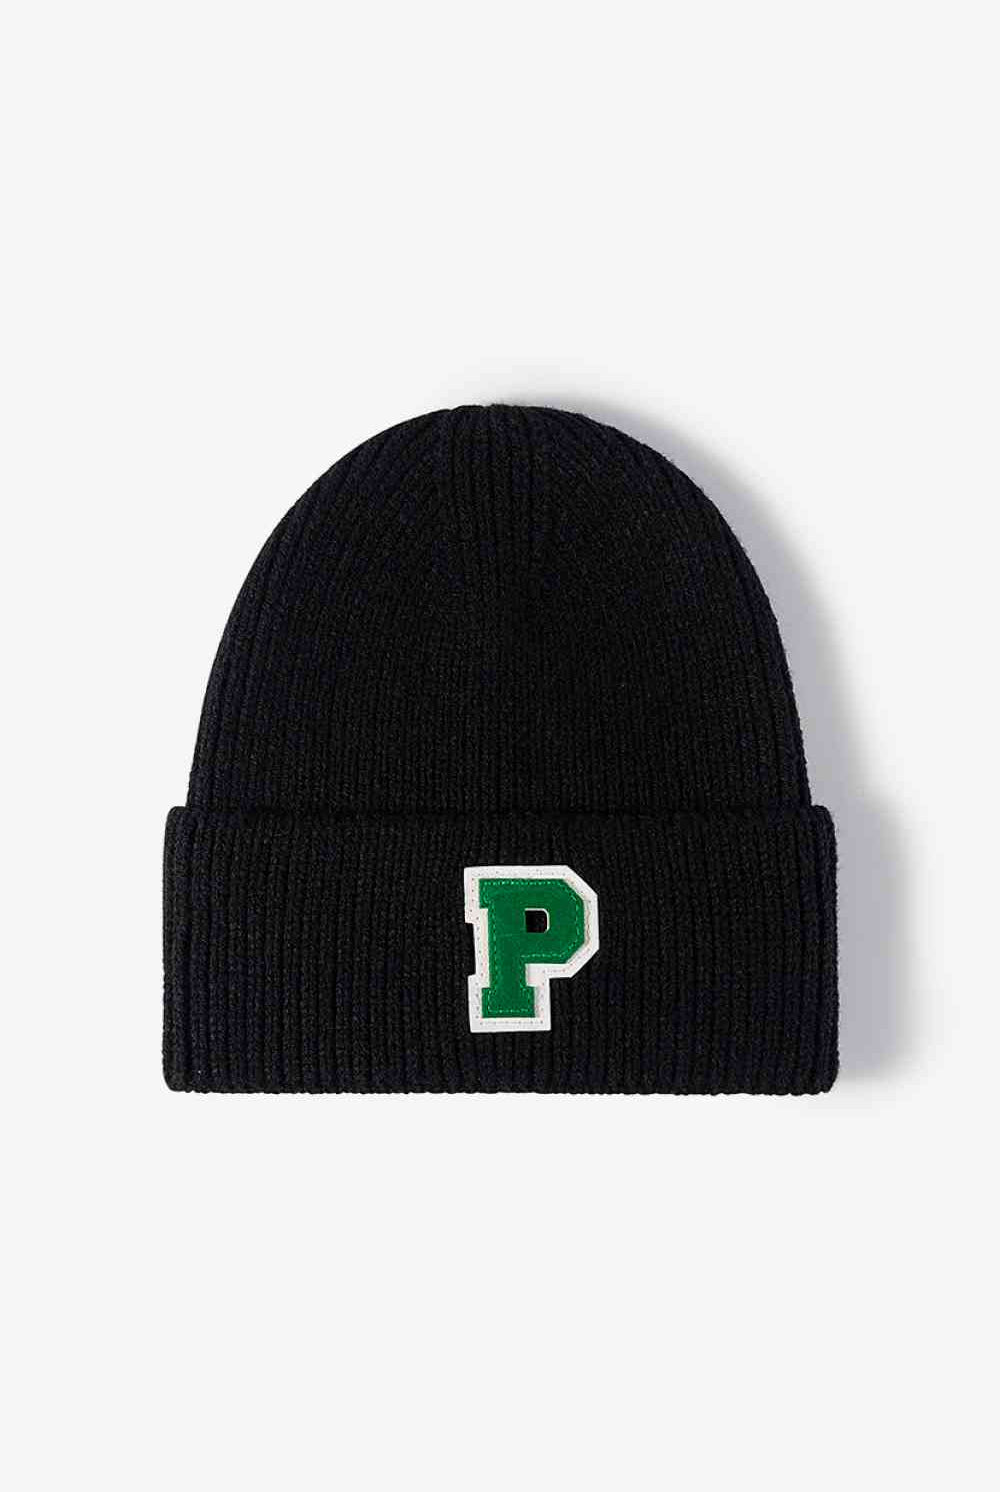 White Smoke Letter Patch Cuffed Knit Beanie Winter Accessories